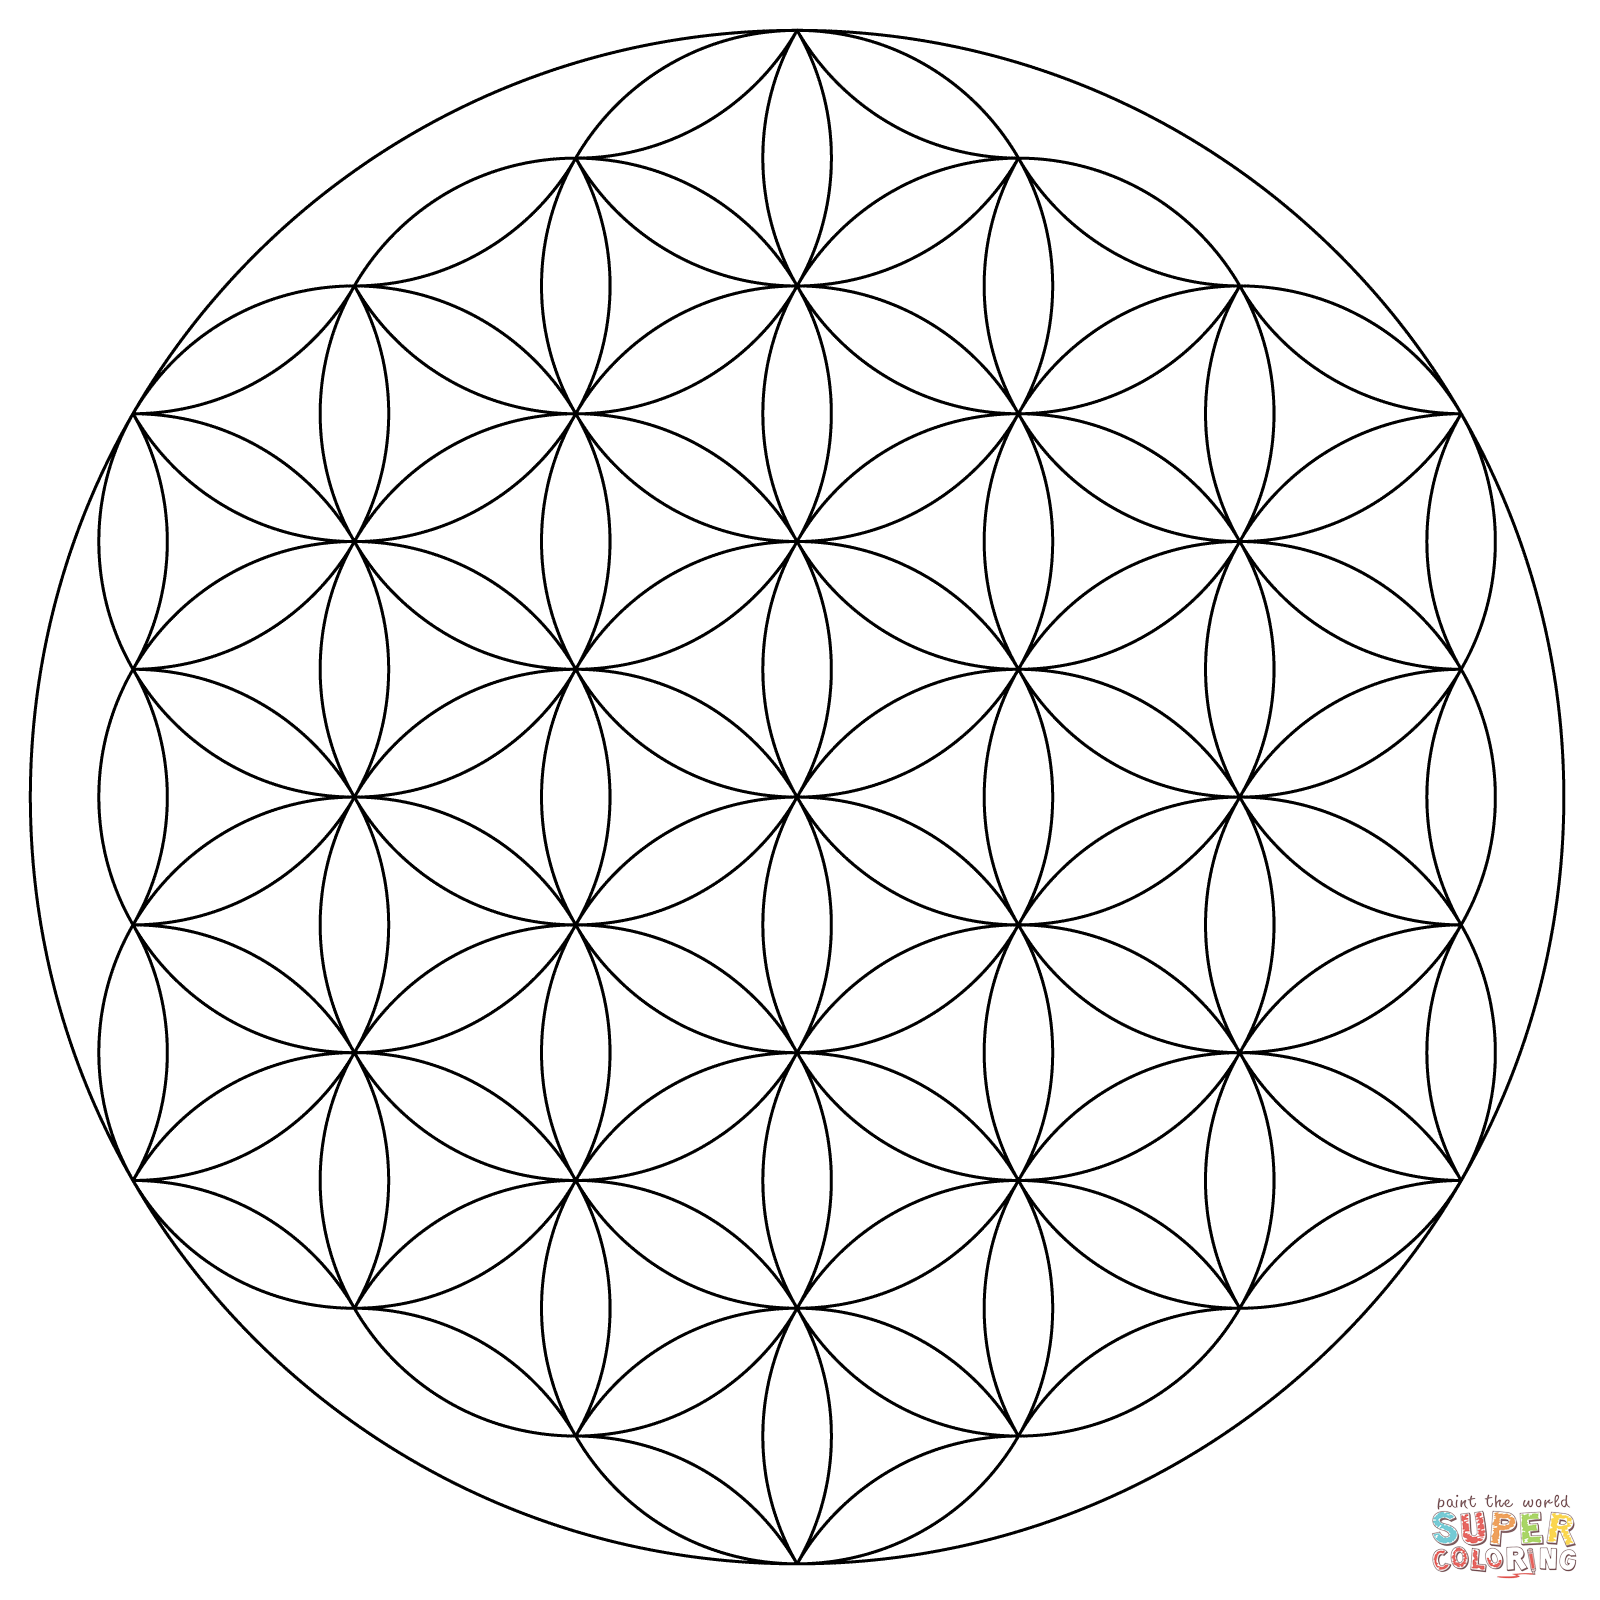 Flower Of Life Mandala Coloring Page Free Printable Coloring Pages